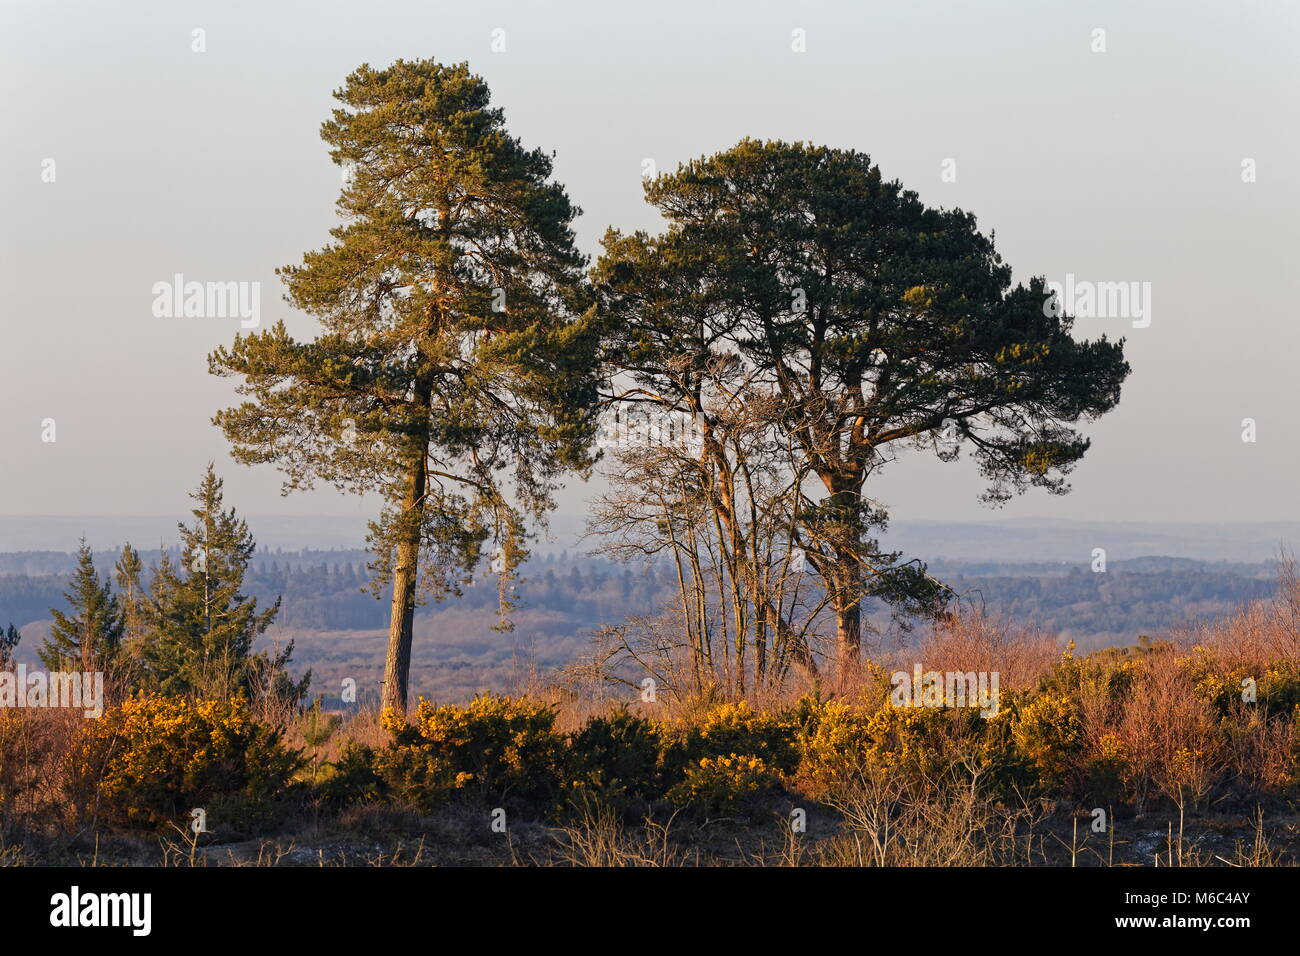 Two pine trees in golden sunlight on edge of Caesar's Camp an Iron Age hill fort straddling the border of the counties of Surrey and Hampshire. Stock Photo